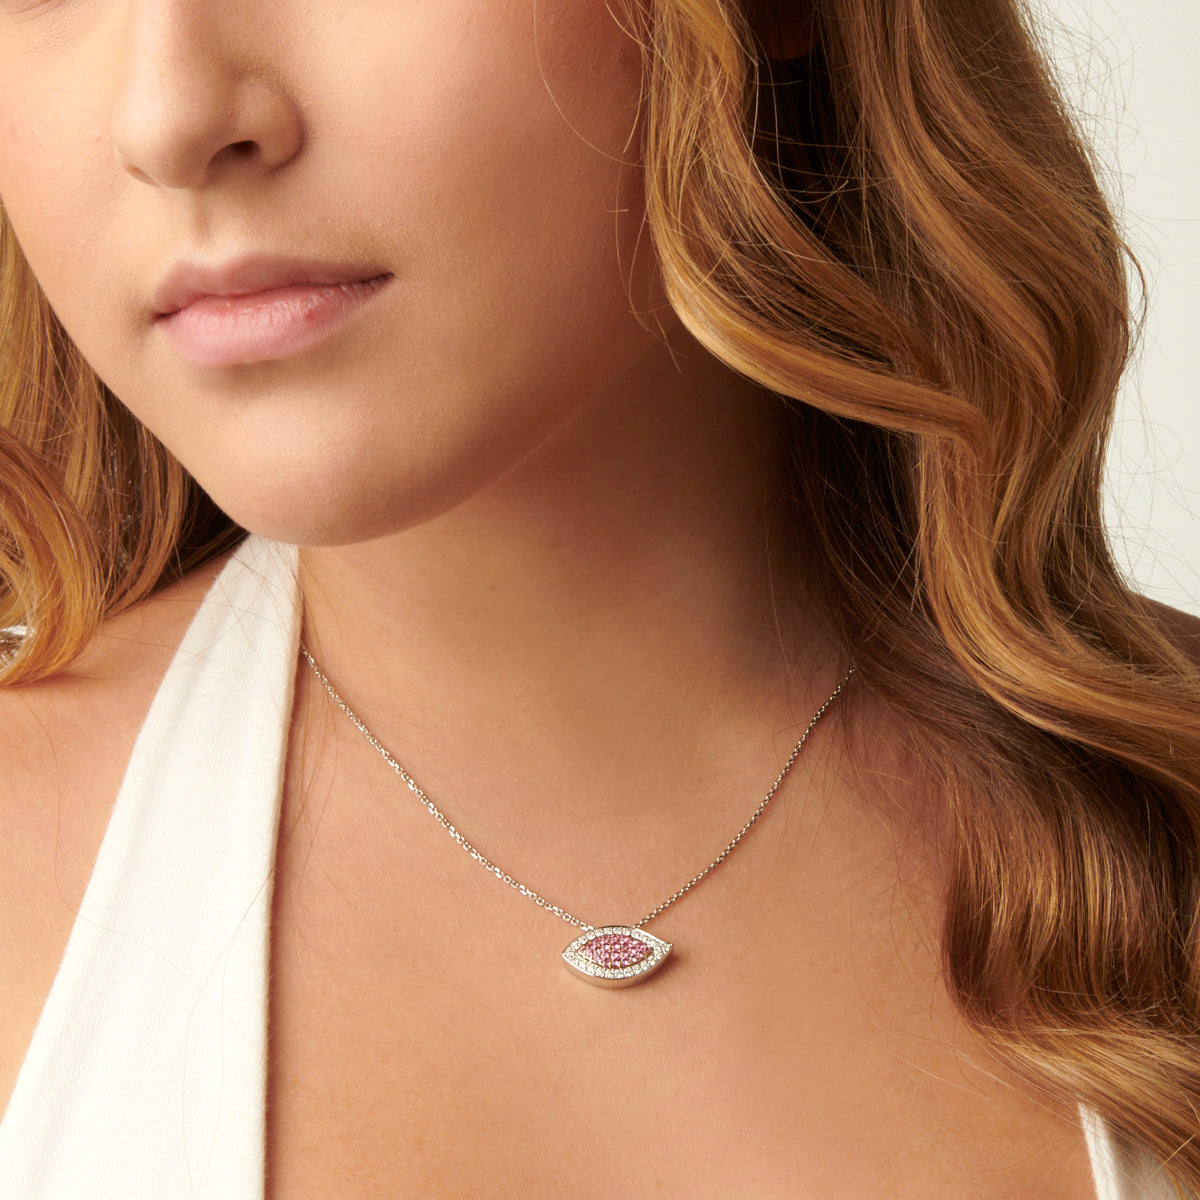 A woman wearing an Evil Eye Pink Sapphire and Diamond Pendant. The pendant is suspended from a chain and is resting on the woman's chest.